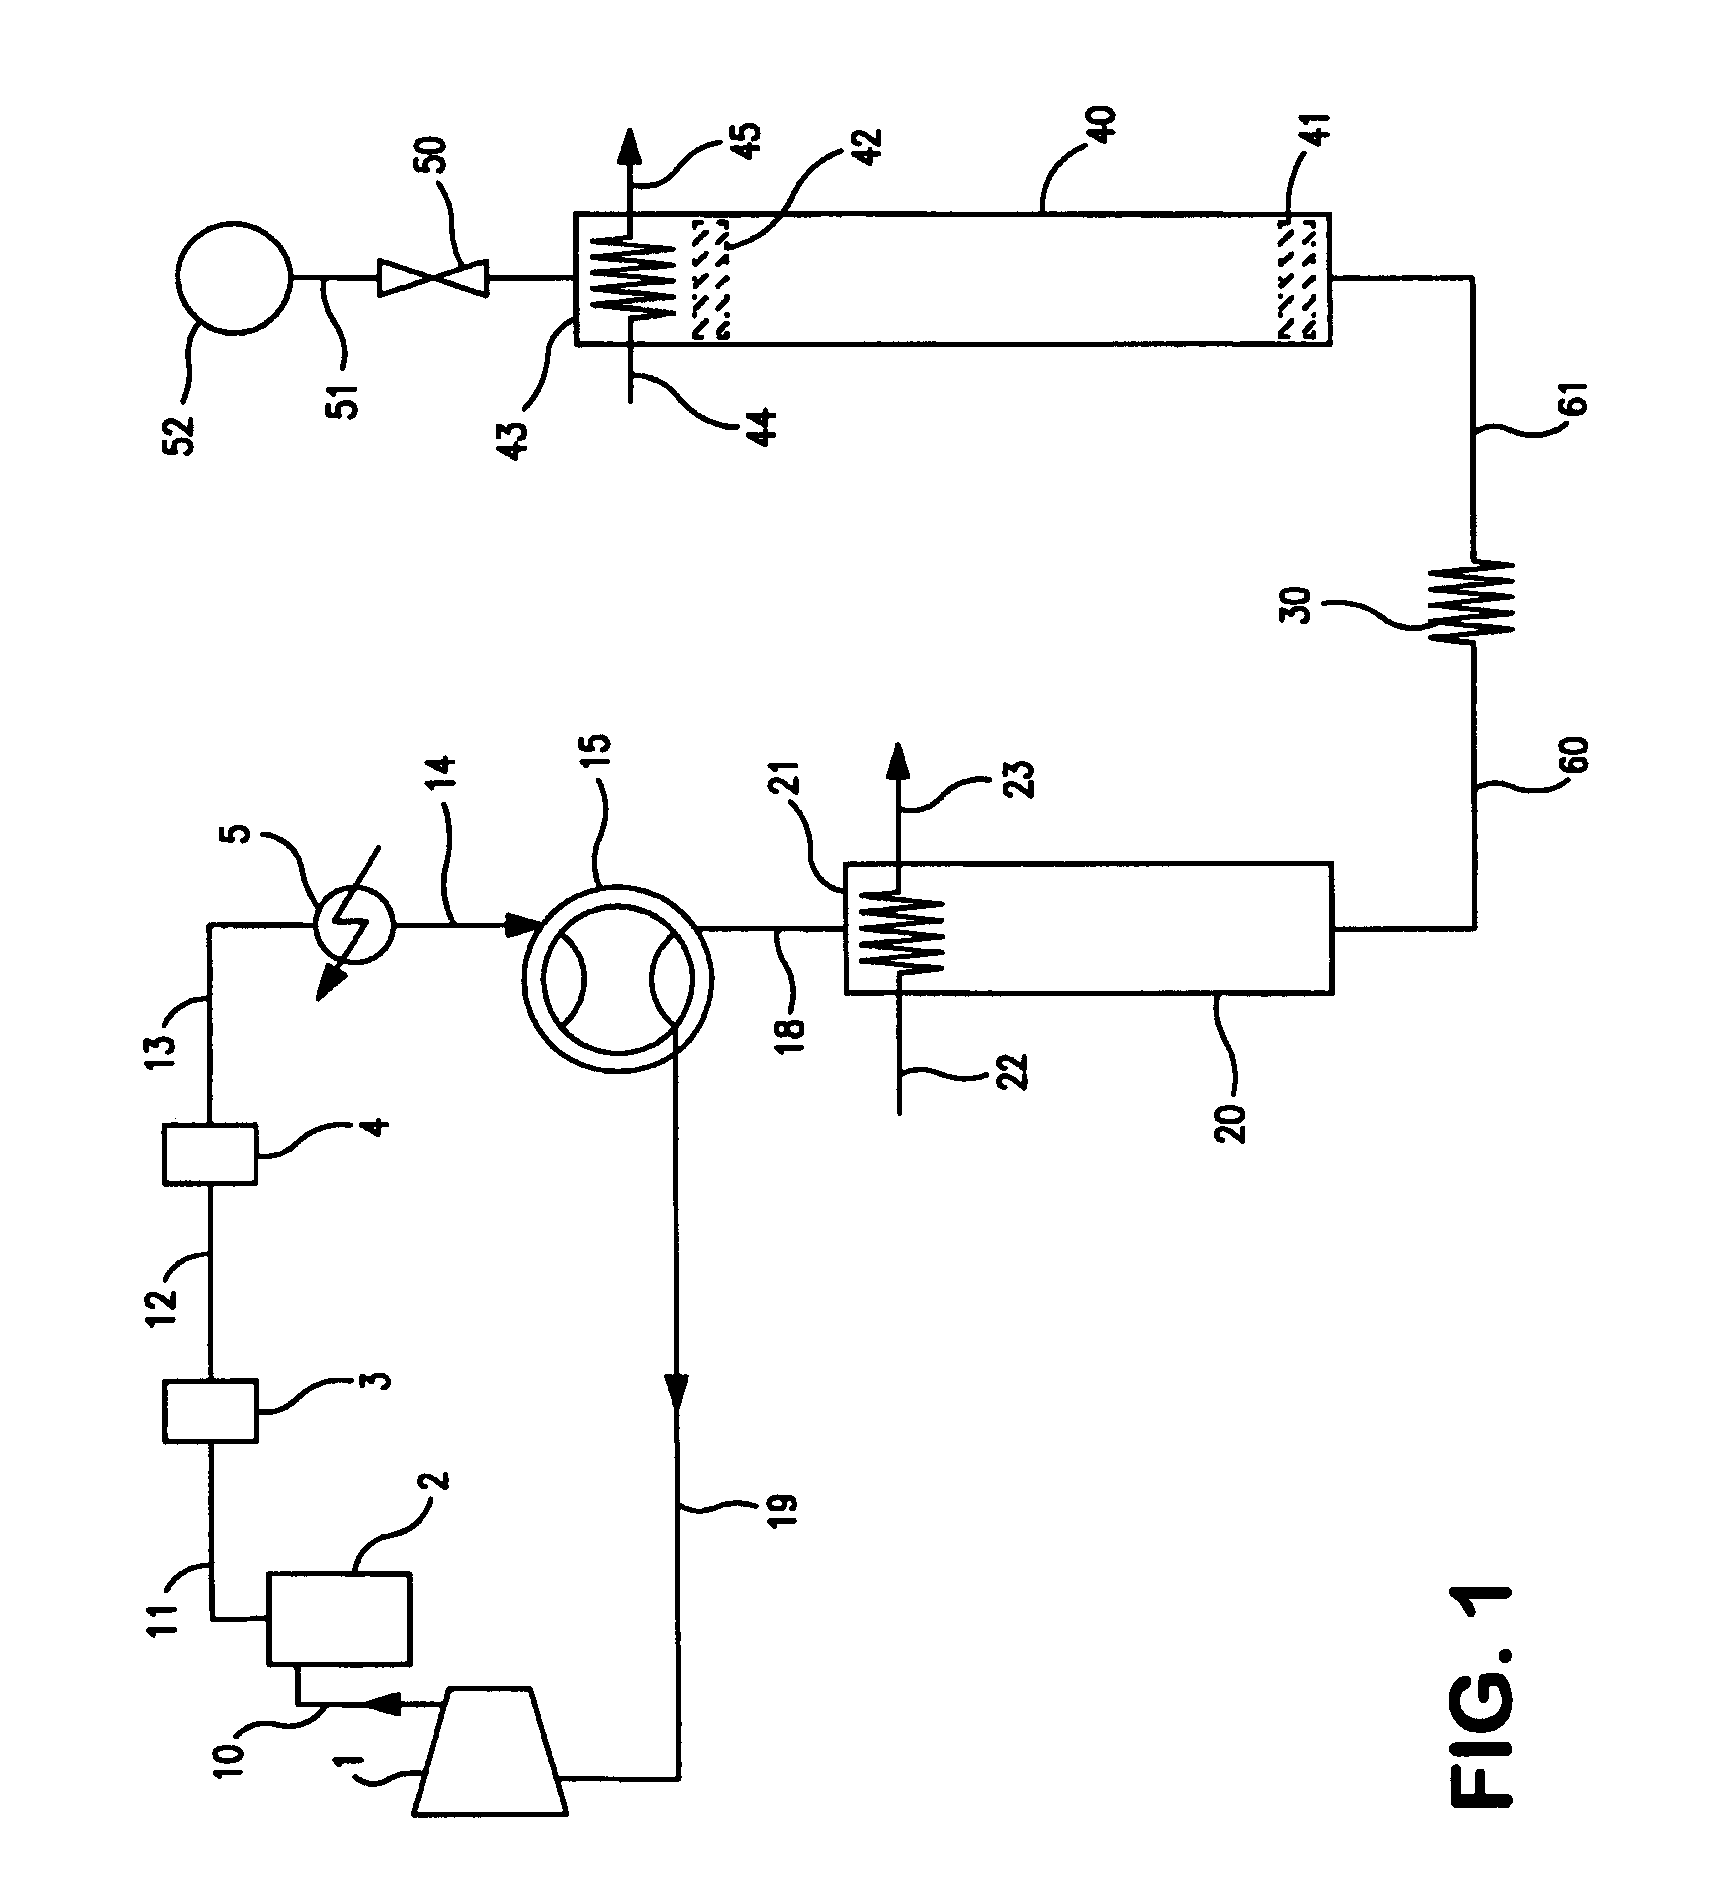 Method for operating a cryocooler using temperature trending monitoring